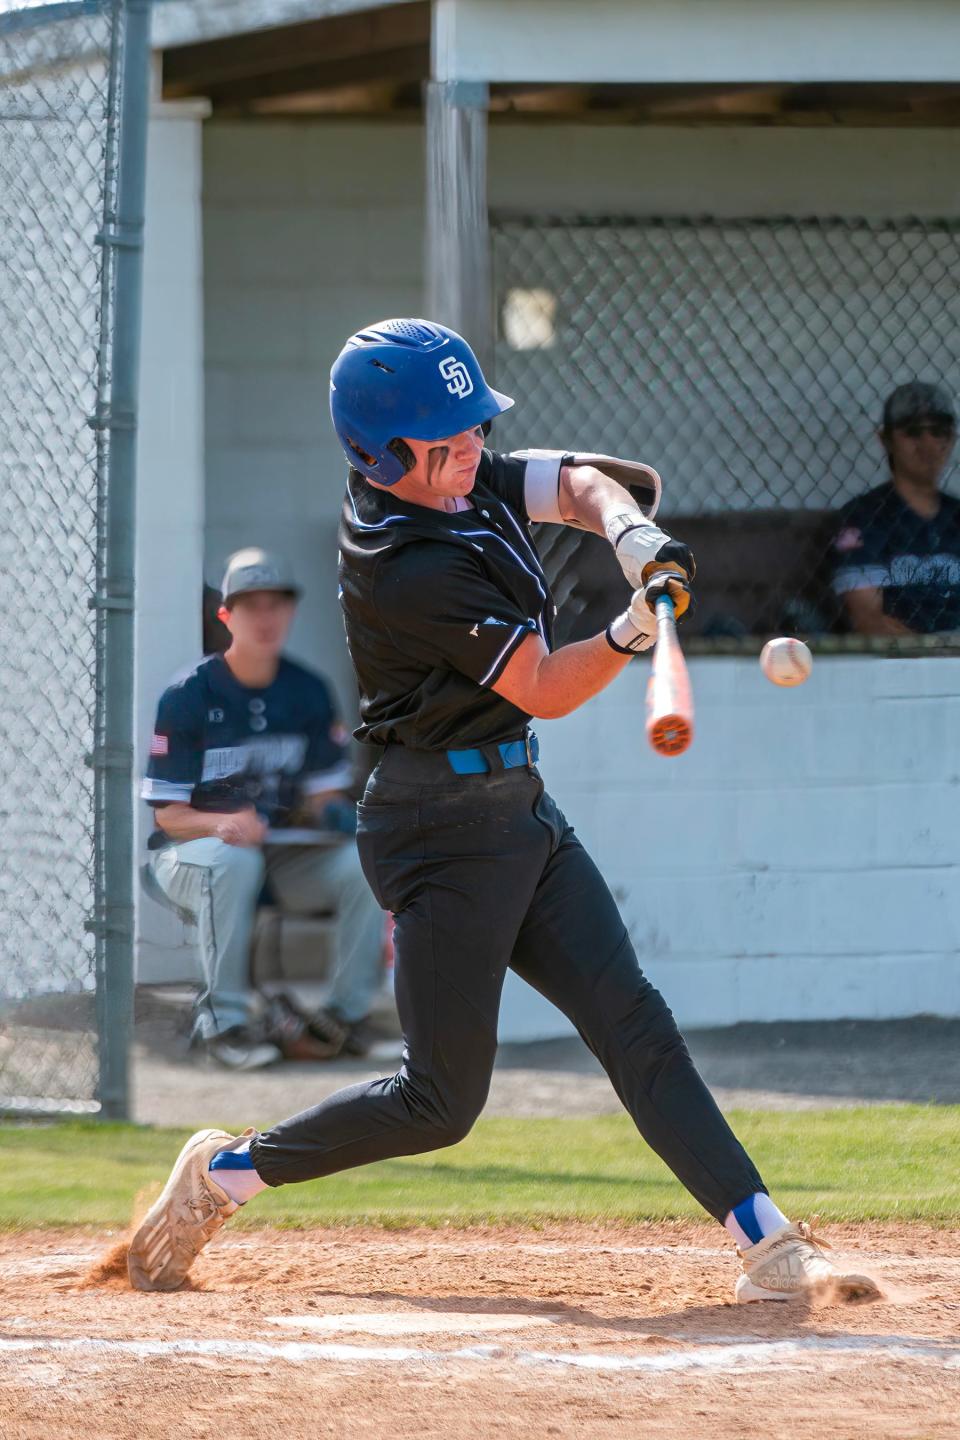 Stephen Decatur’s Waylon Hobgood of Stephen Decatur belts a grand slam to take the lead during their match up against Marriotts Ridge in the 3A quarterfinal. Stephen Decatur went on to win 9-3.